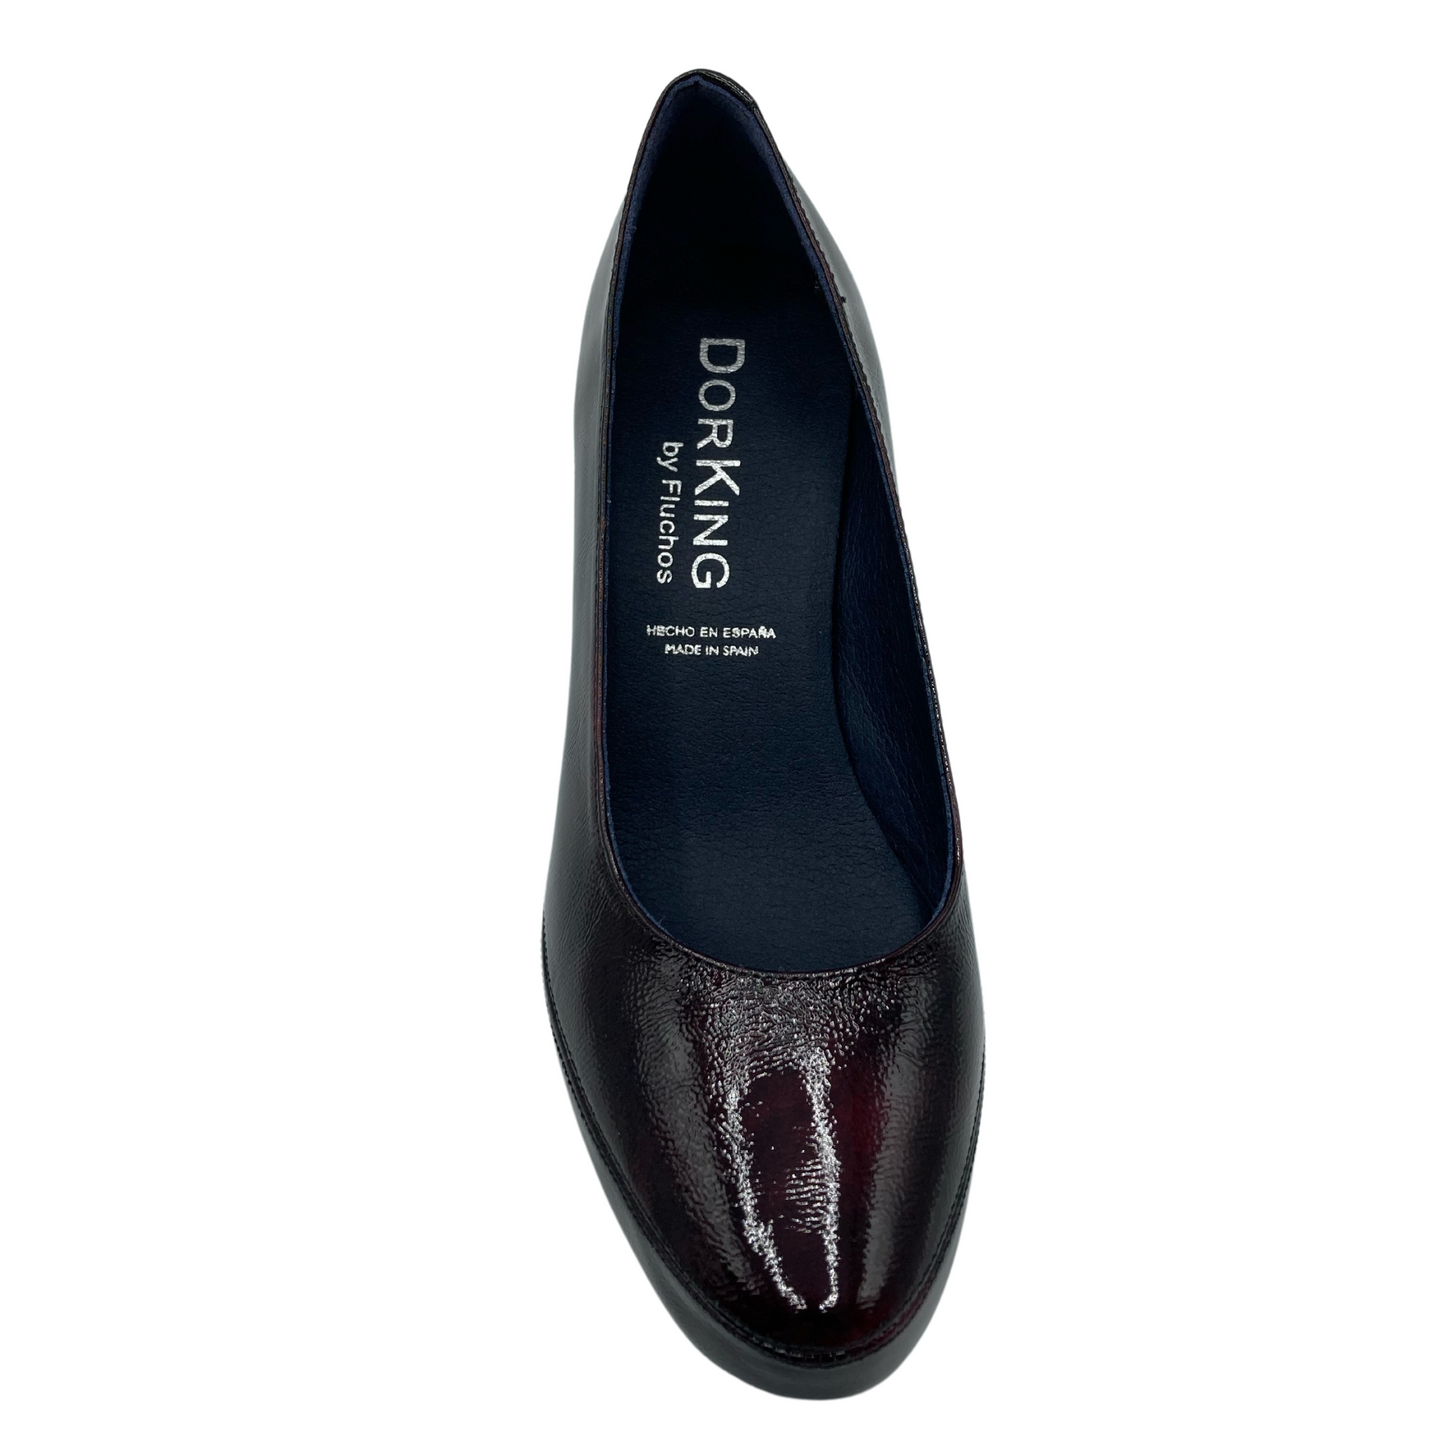 Top view of a patent leather pump with rounded toe